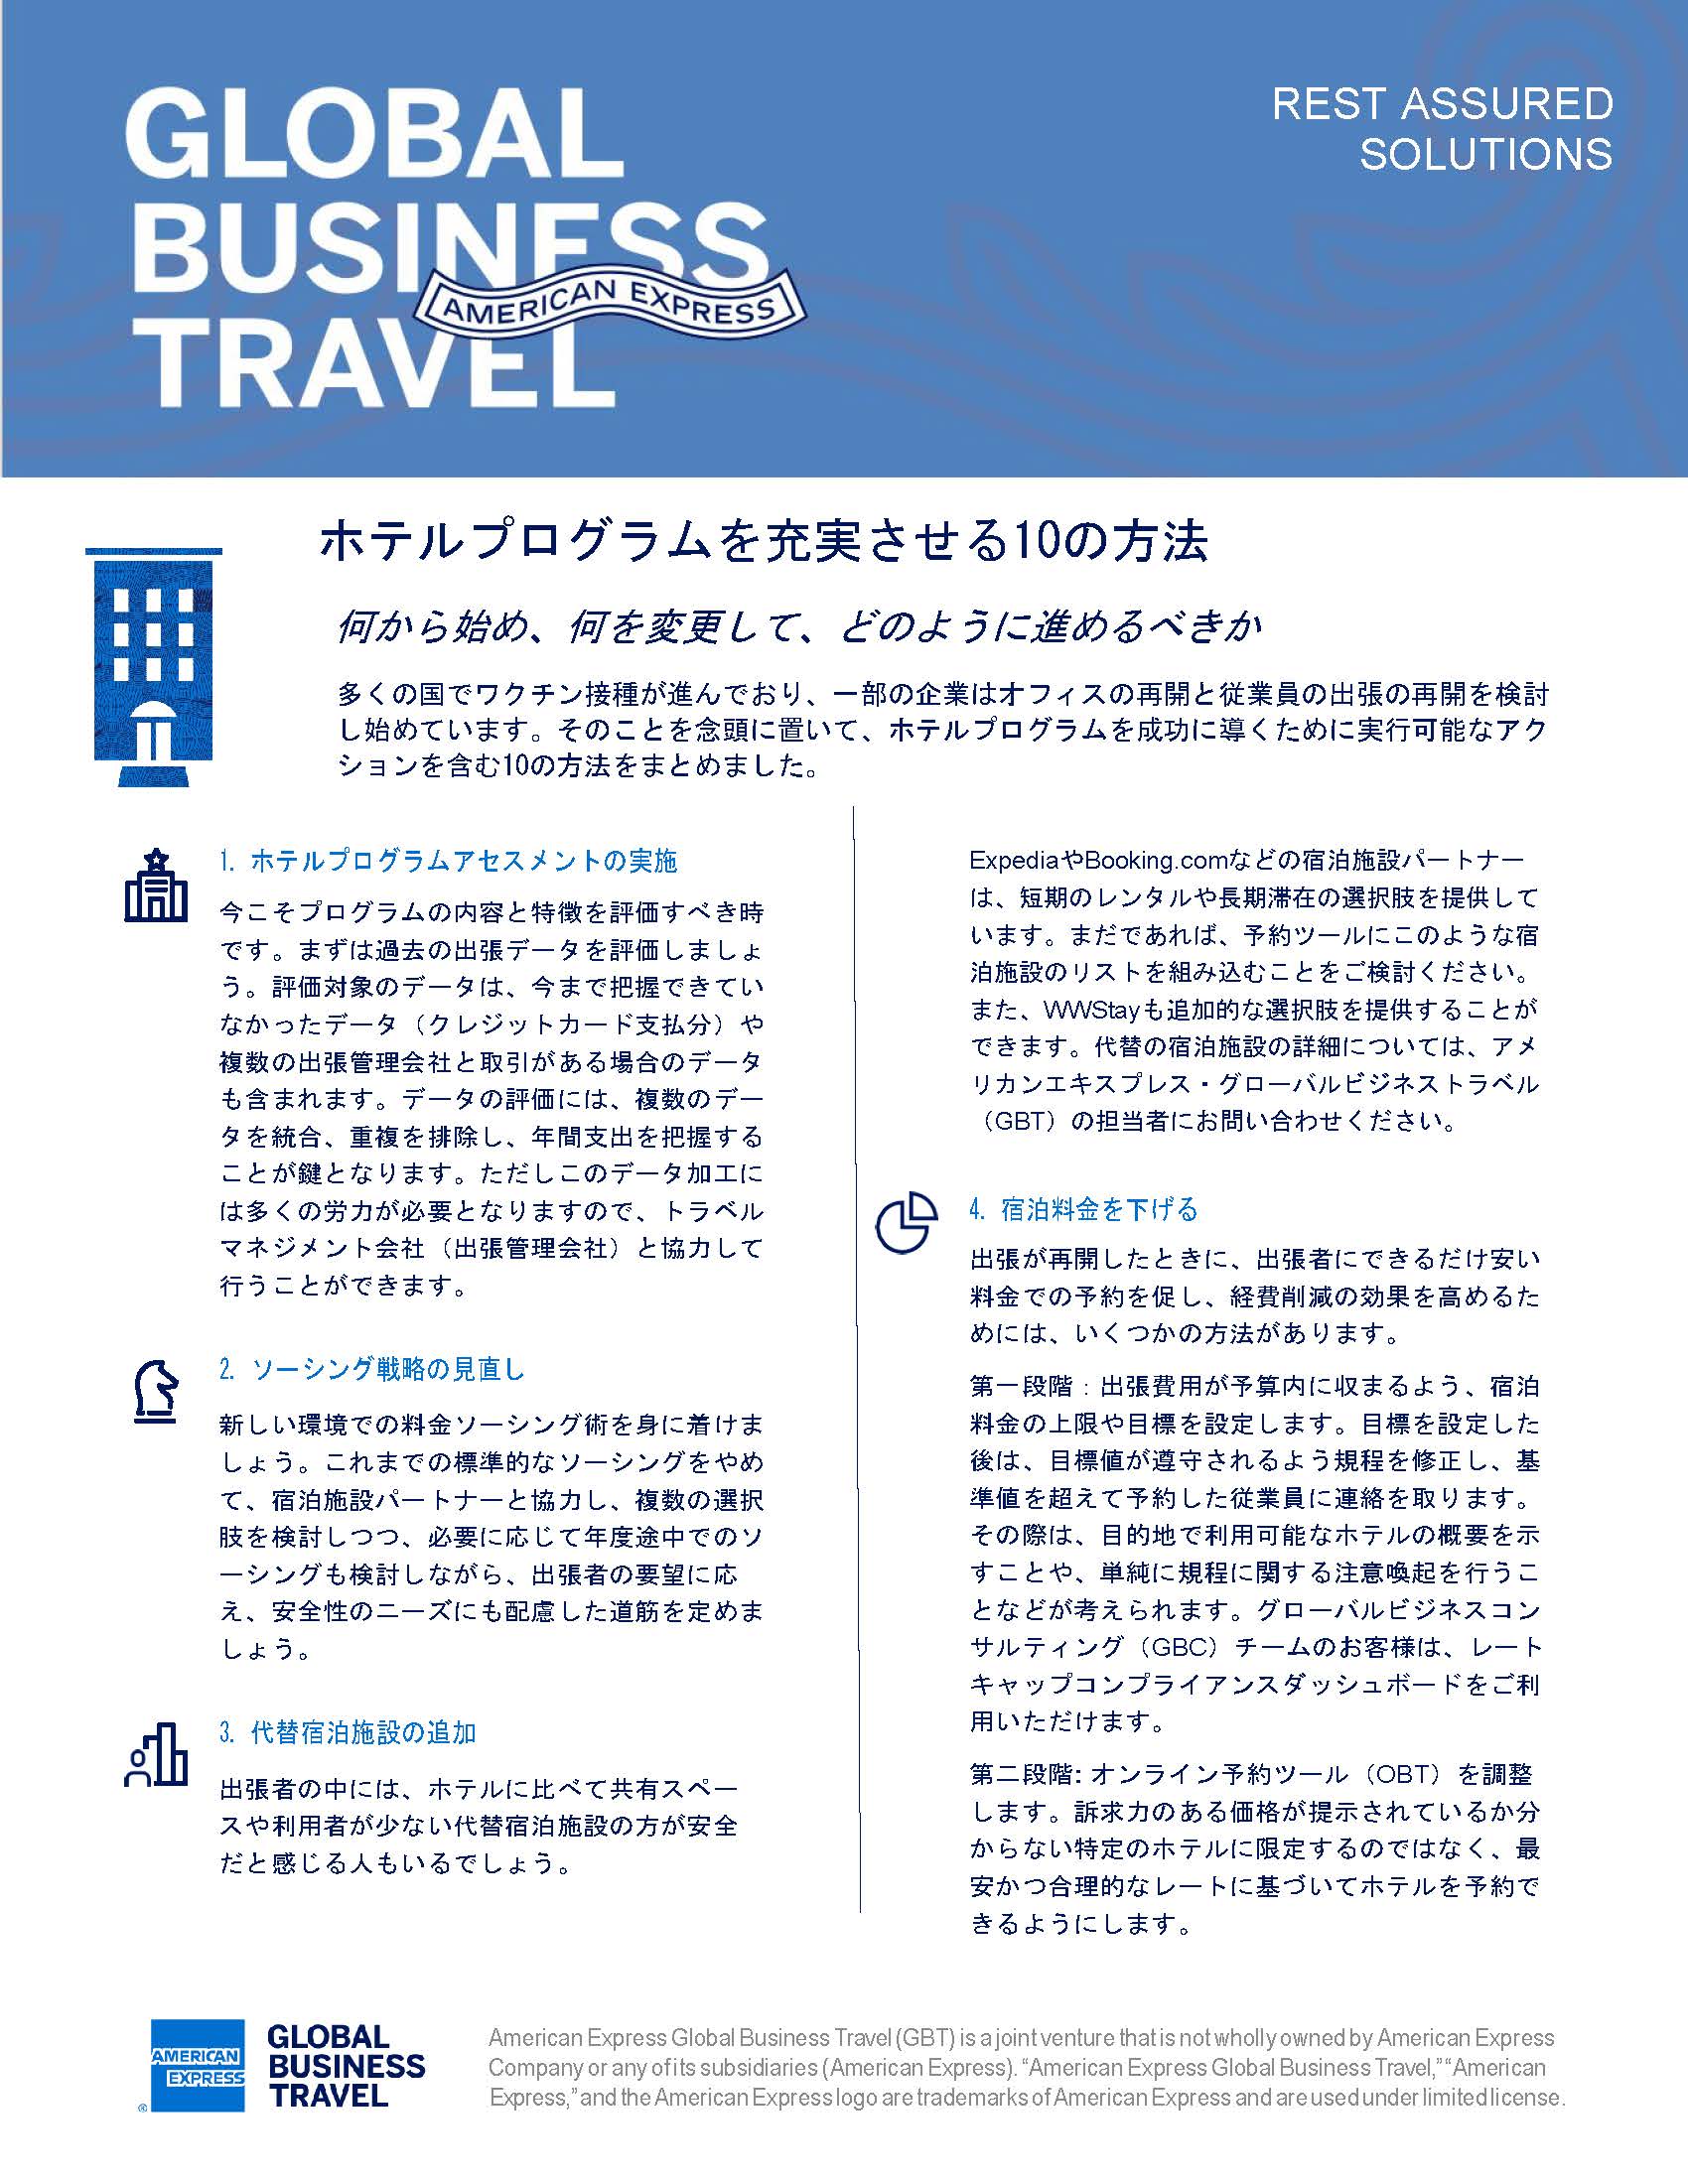 10-Steps-to-Recharge-Your-Hotel-Program_FINAL J_ページ_1.jpg